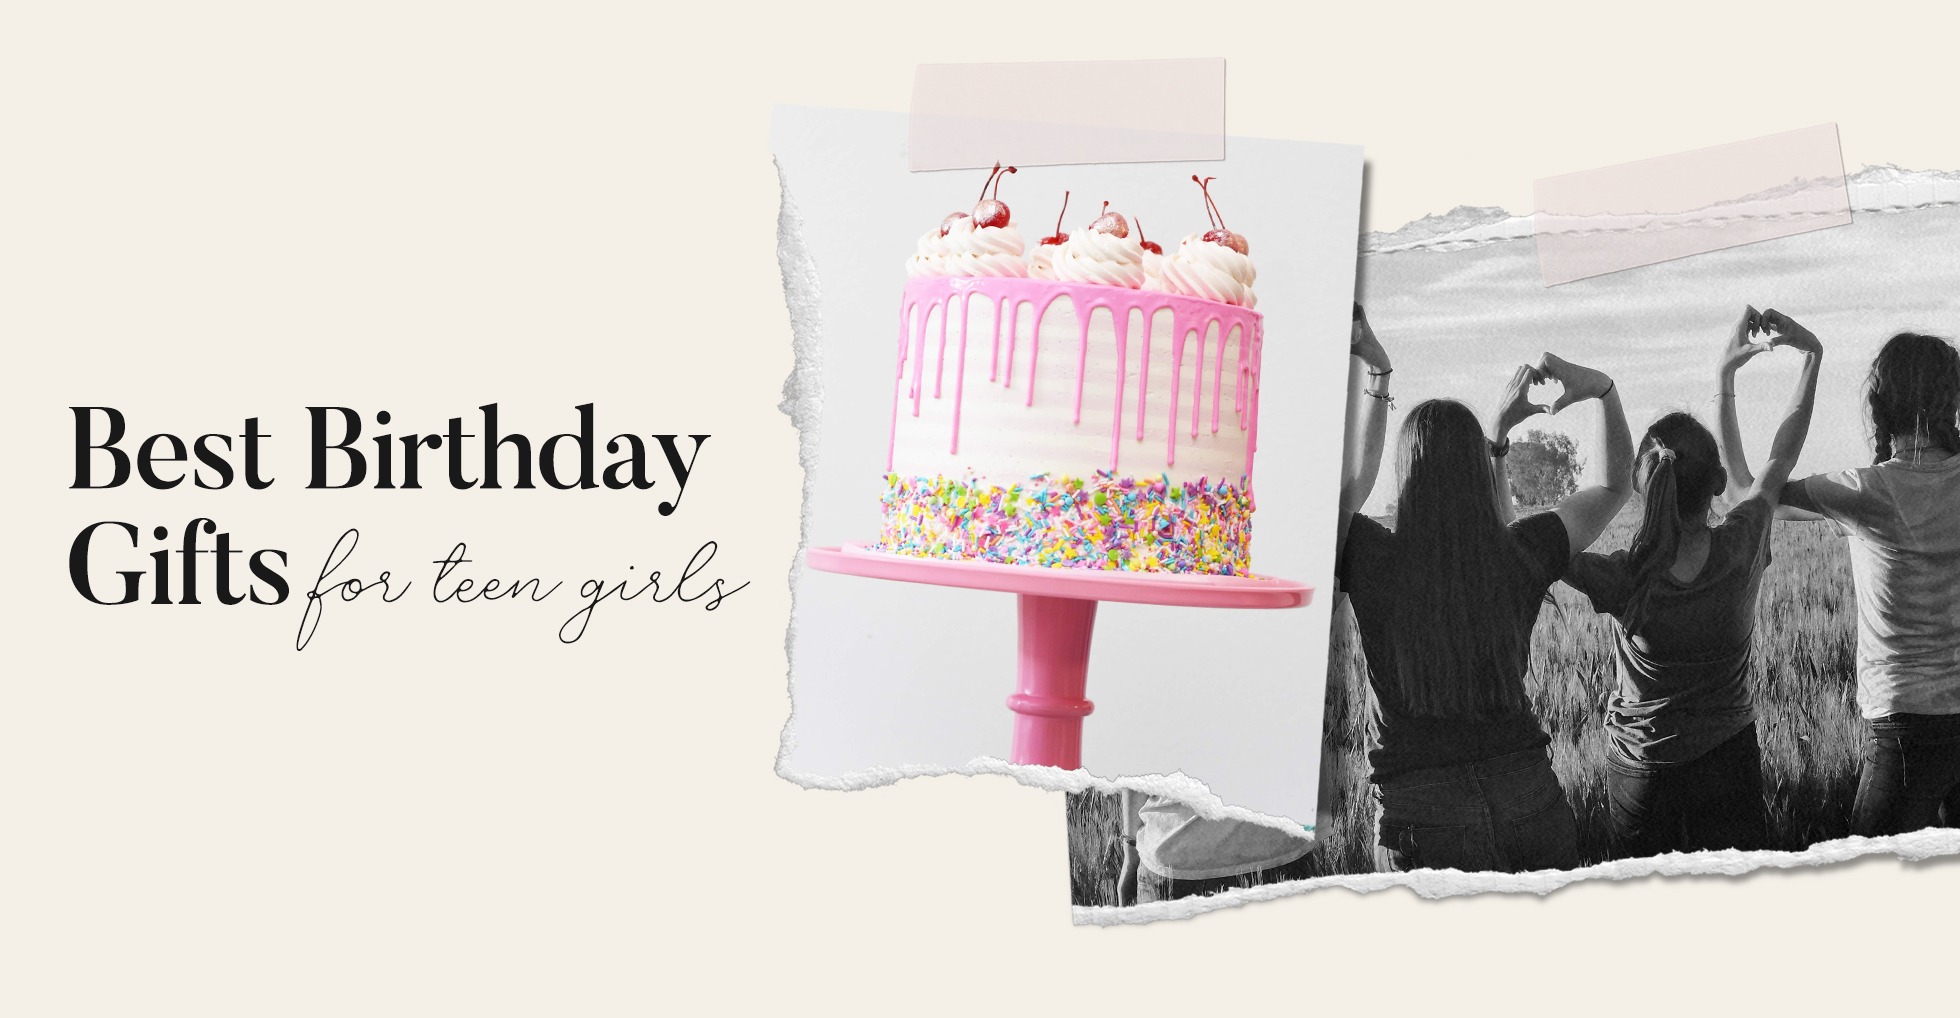 7 Best Birthday Gifts for Teen Girls Guide